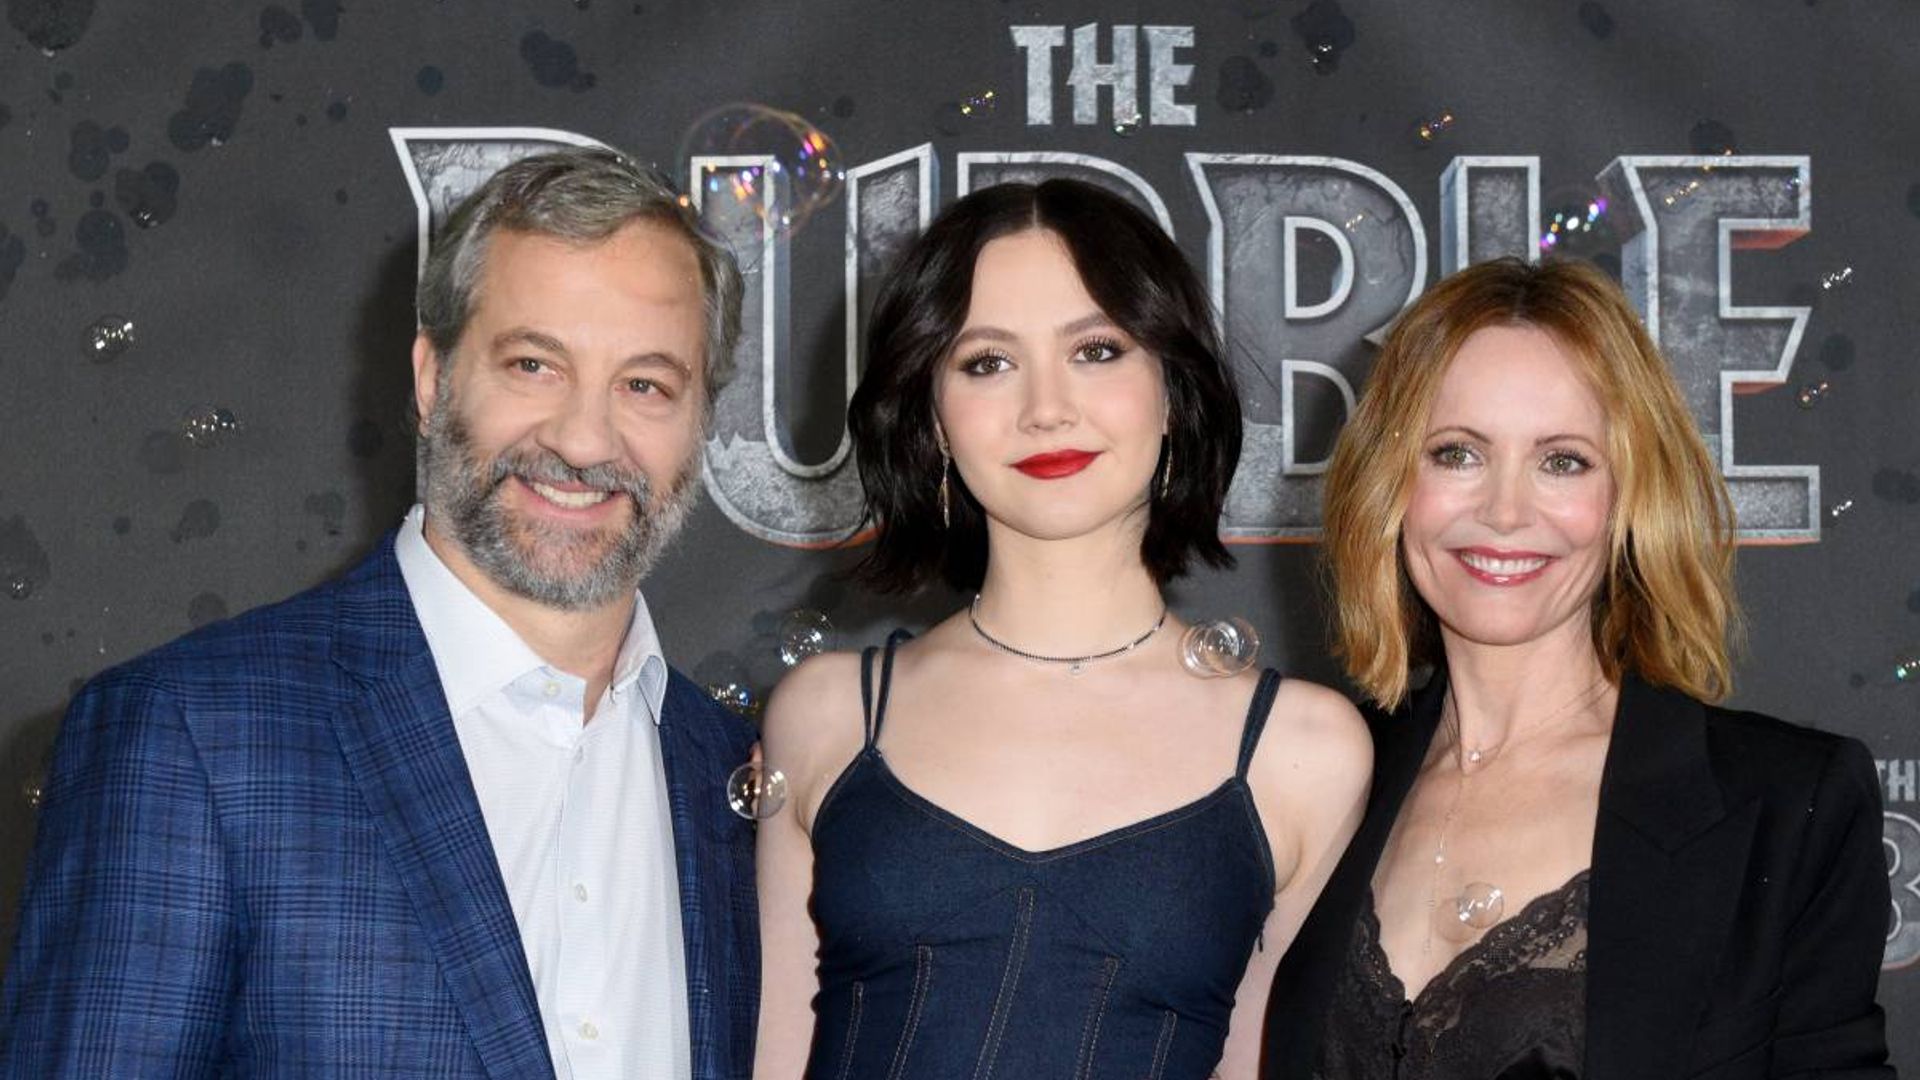 Judd Apatow makes it a family affair in 'This is 40